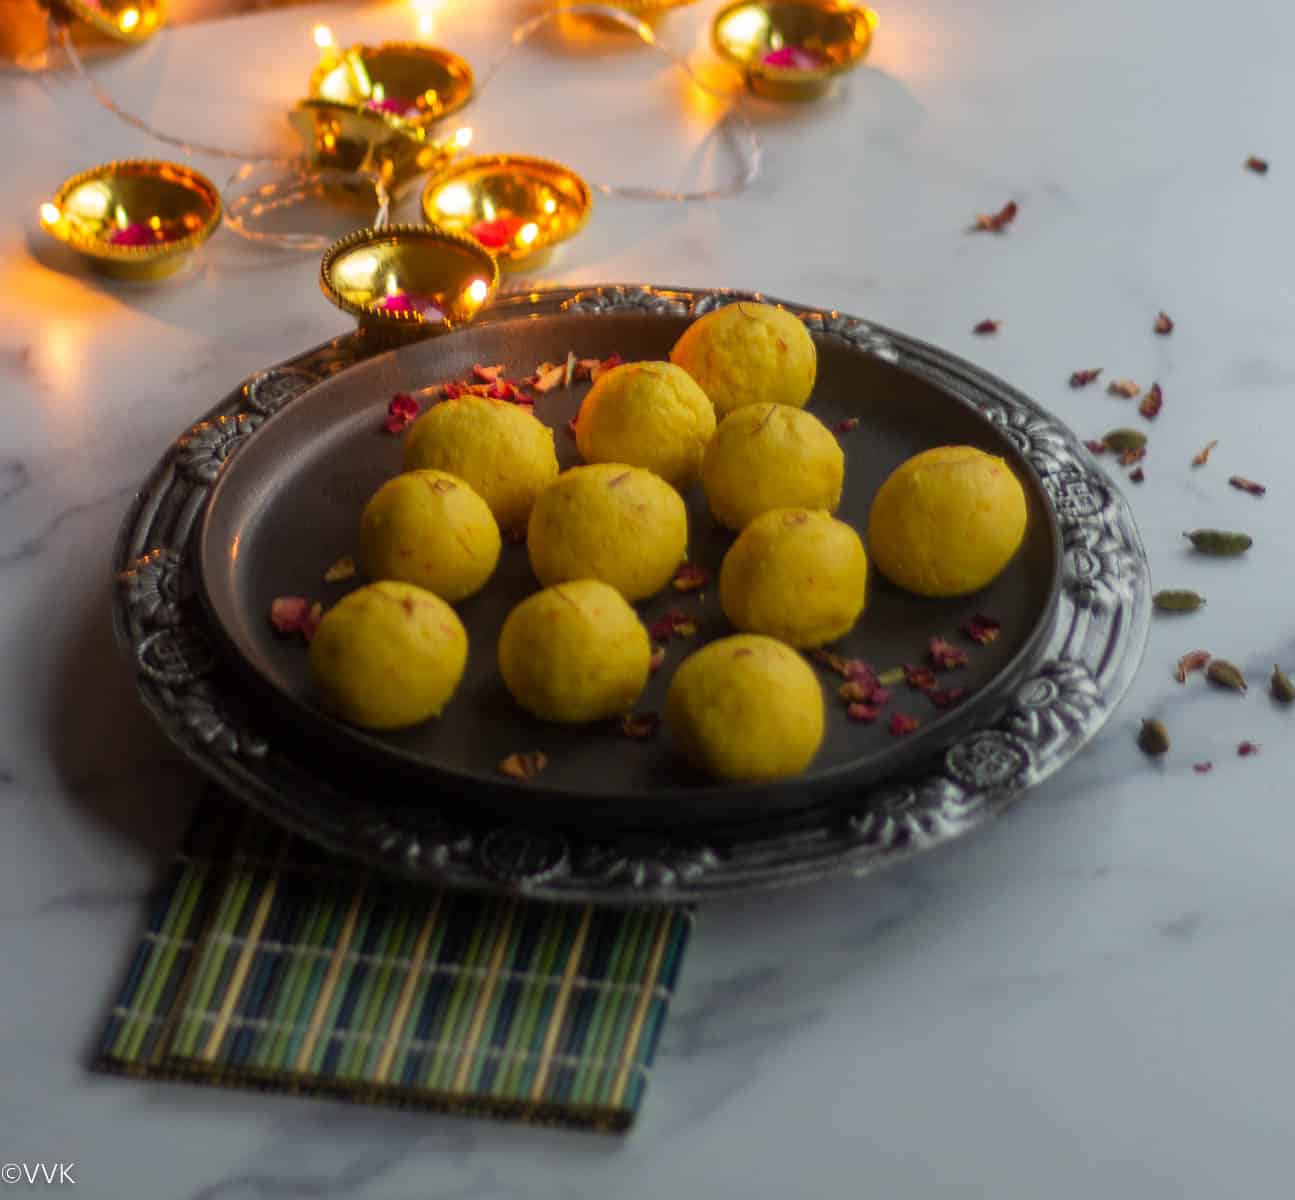 paneer ladoo served on ceramic plate placed on green mat with some lights on the background